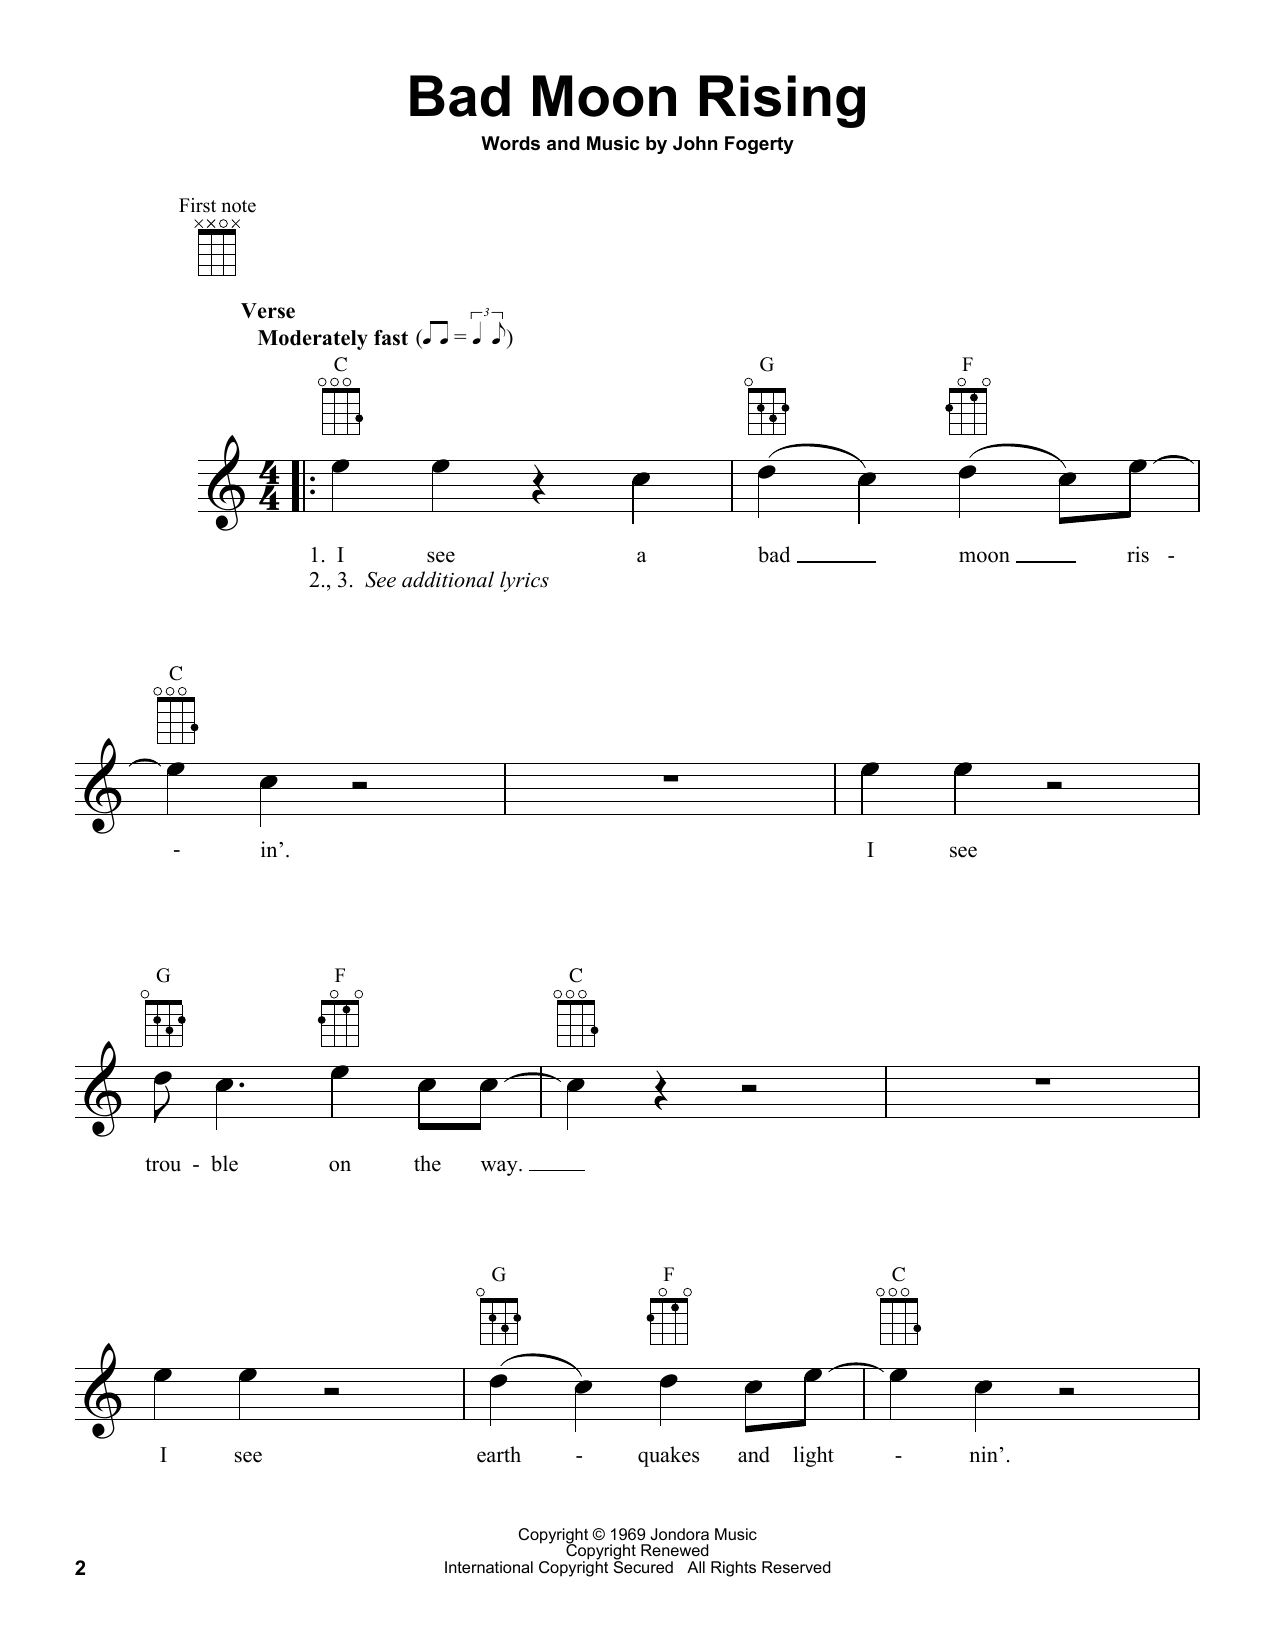 Bad Moon Rising Chords Creedence Clearwater Revival Bad Moon Rising Sheet Music Notes Chords